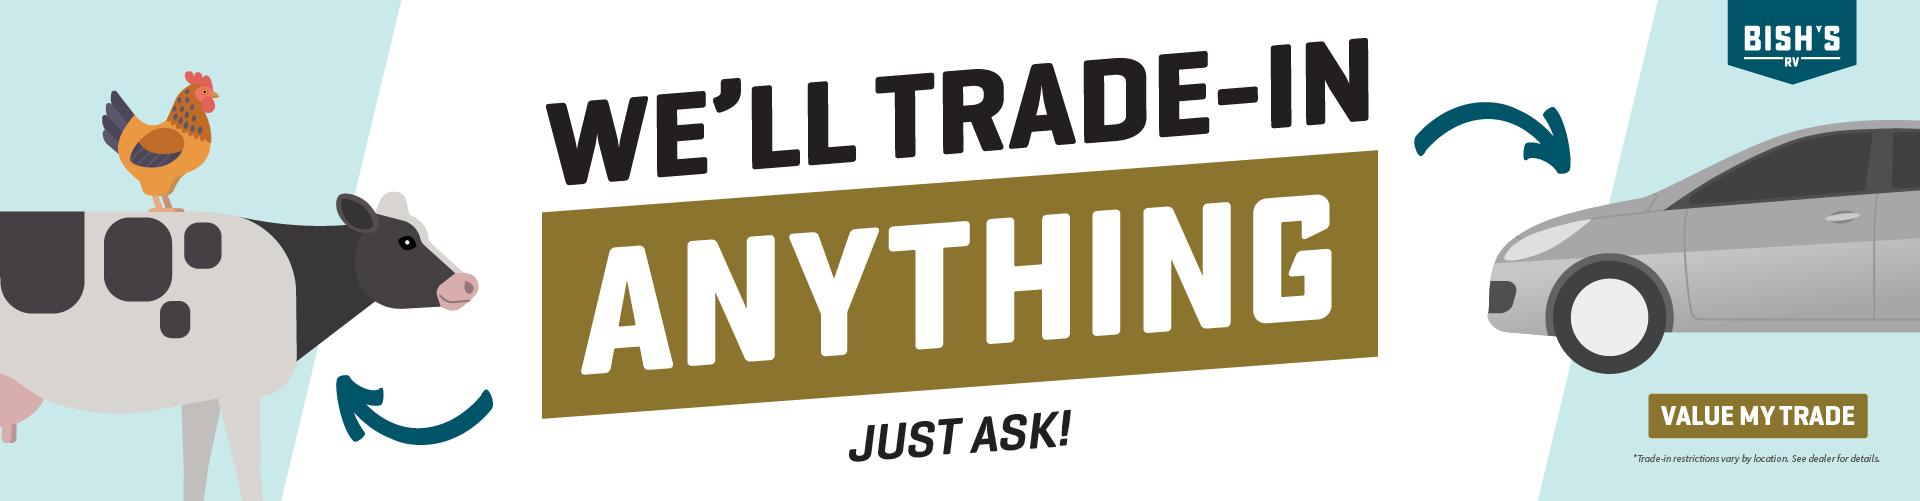 We'll trade-in anything - just ask!